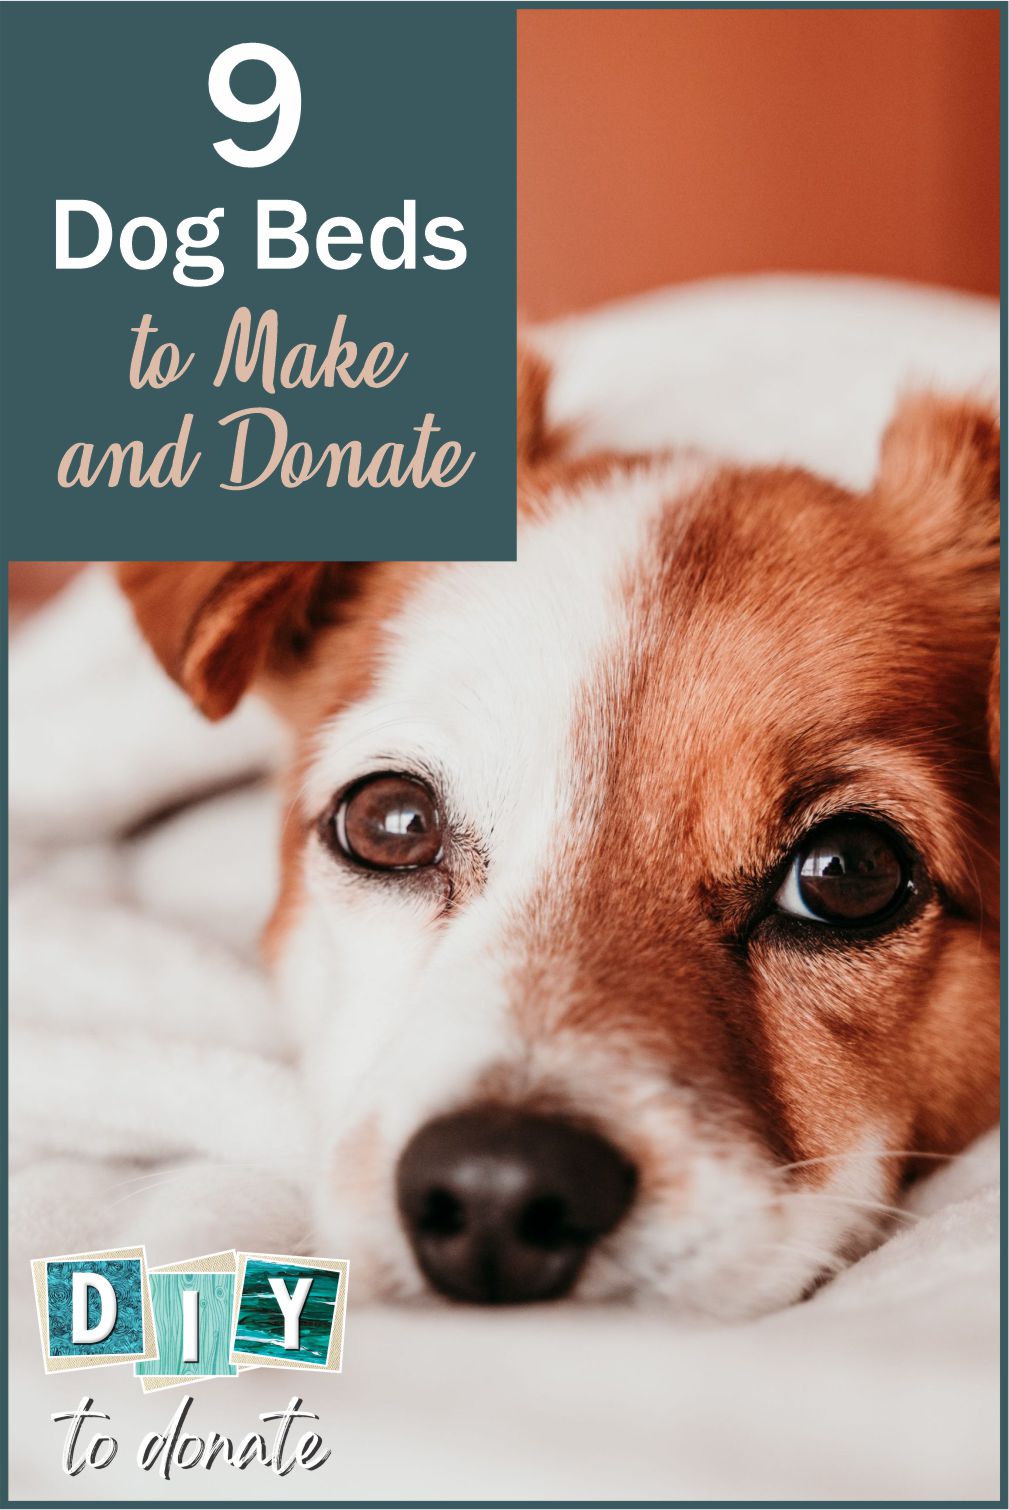 When you make dog blankets for the Comfort for Critters you are not just giving dogs a comfortable place to sleep, you are giving them a sense of security. #diytodonate #diy #donate #dogblankets #dogbeds #donatedogbeds #petbeds #pets #beds #giveback #communityservice